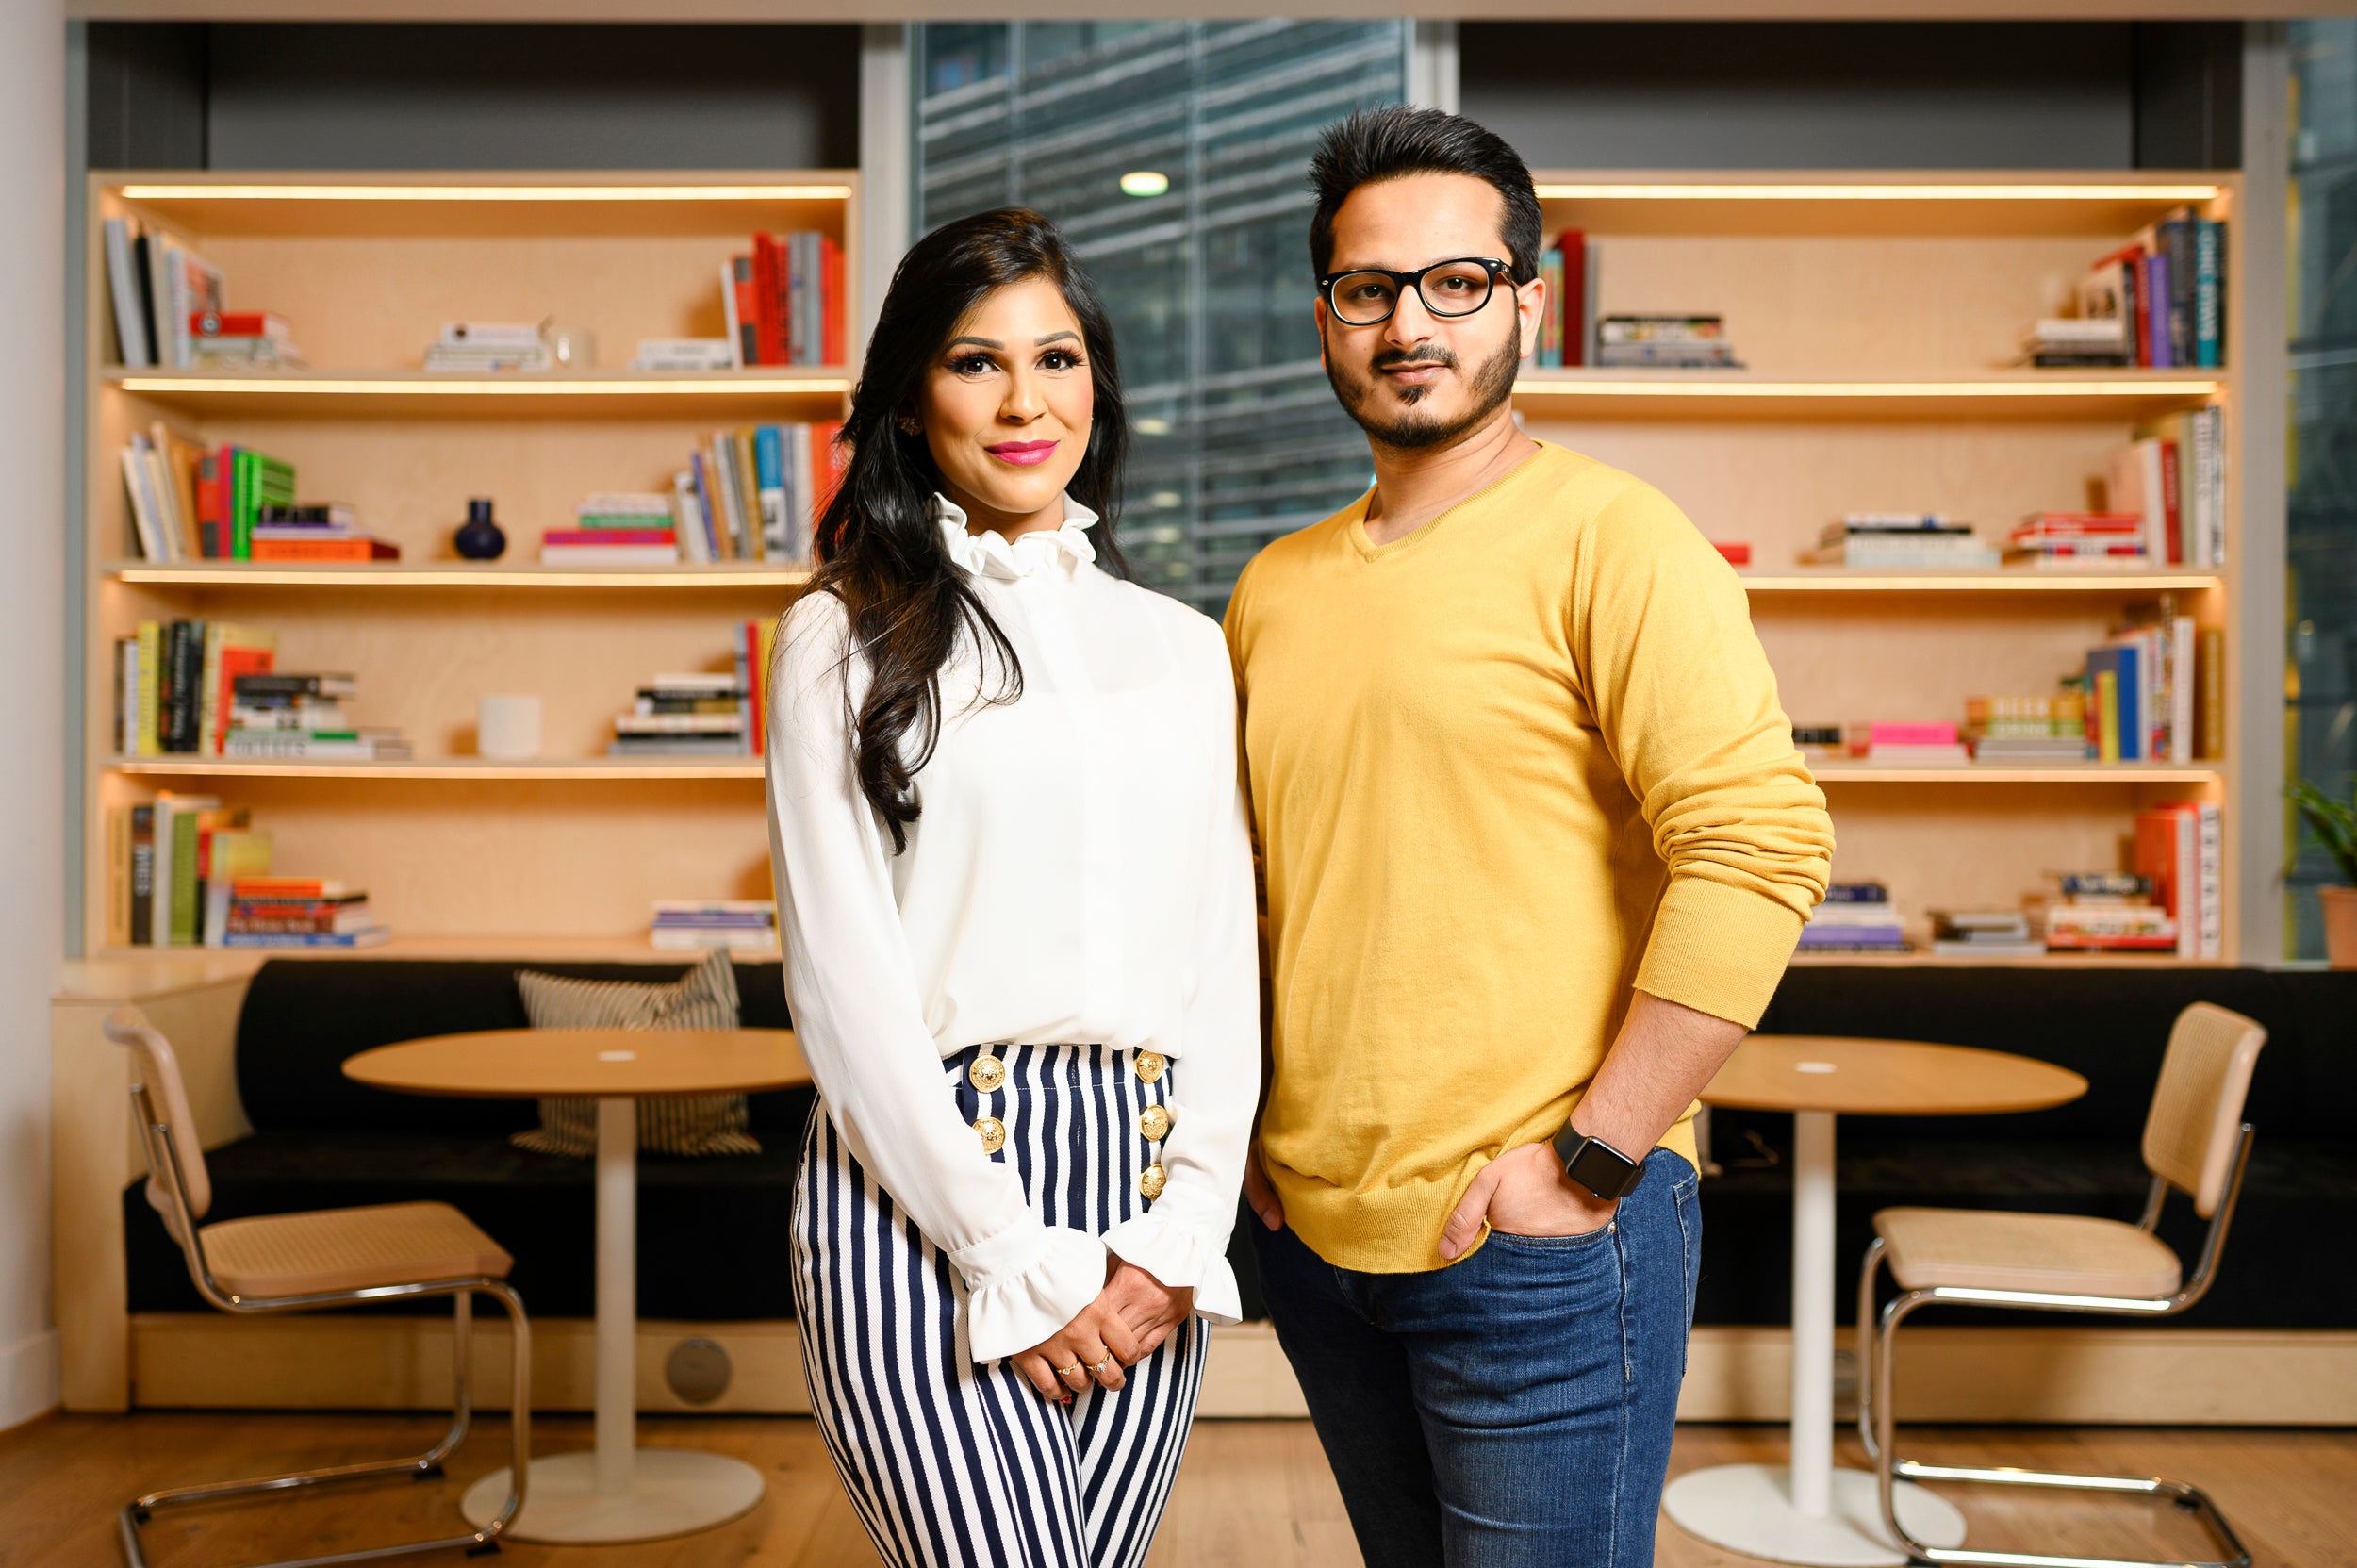 Partners Jami and Faiza Saiful are fighting a growing wasteland of ambition